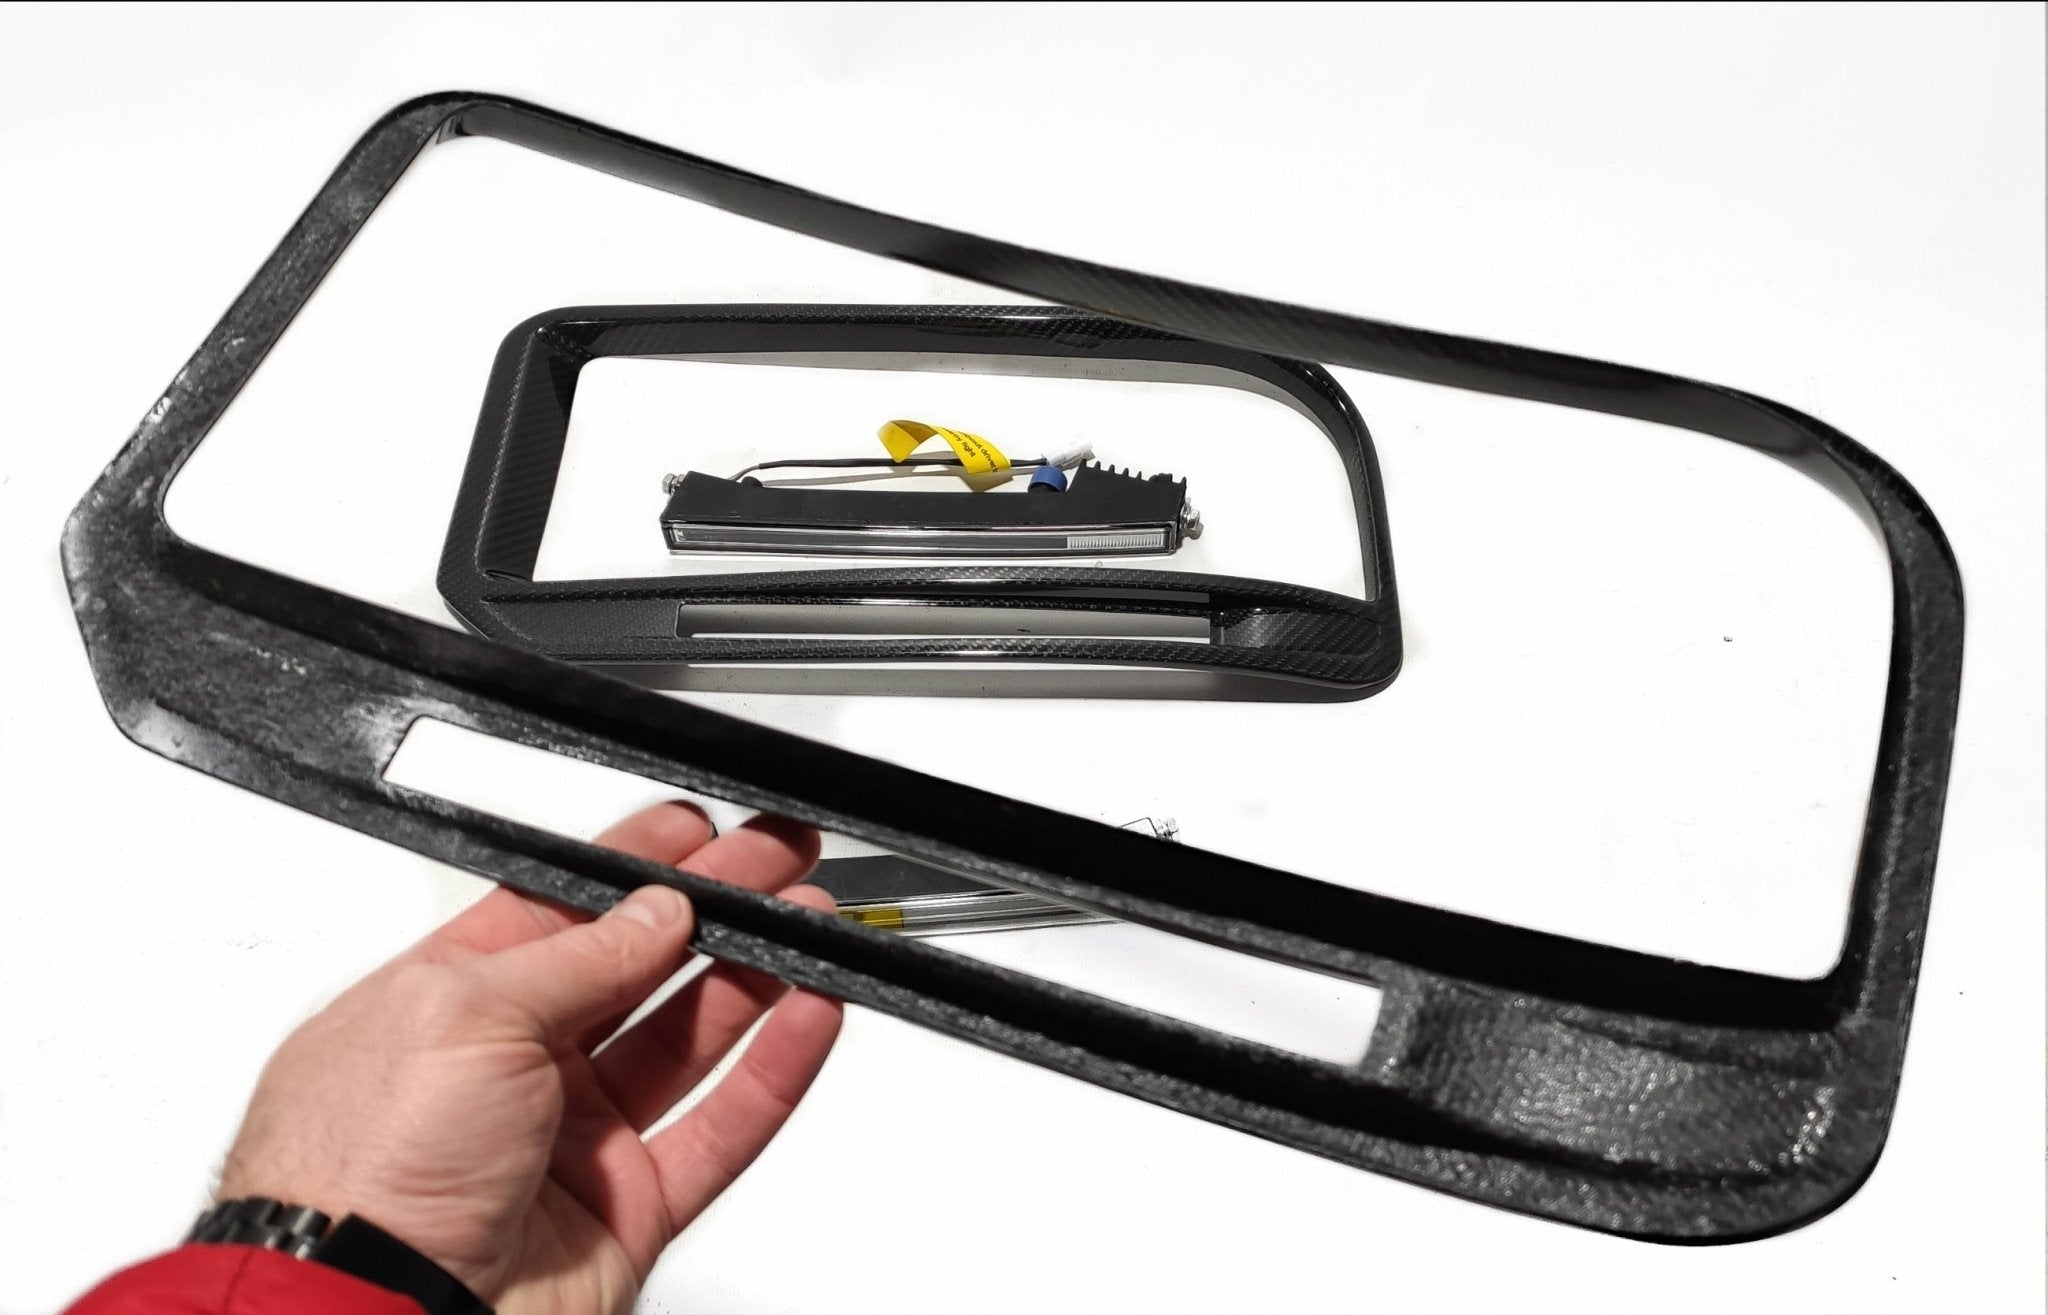 W463a W464 G900 G Wagon carbon fiber front bumper frames insertions with LED lights for Widestar Brabus